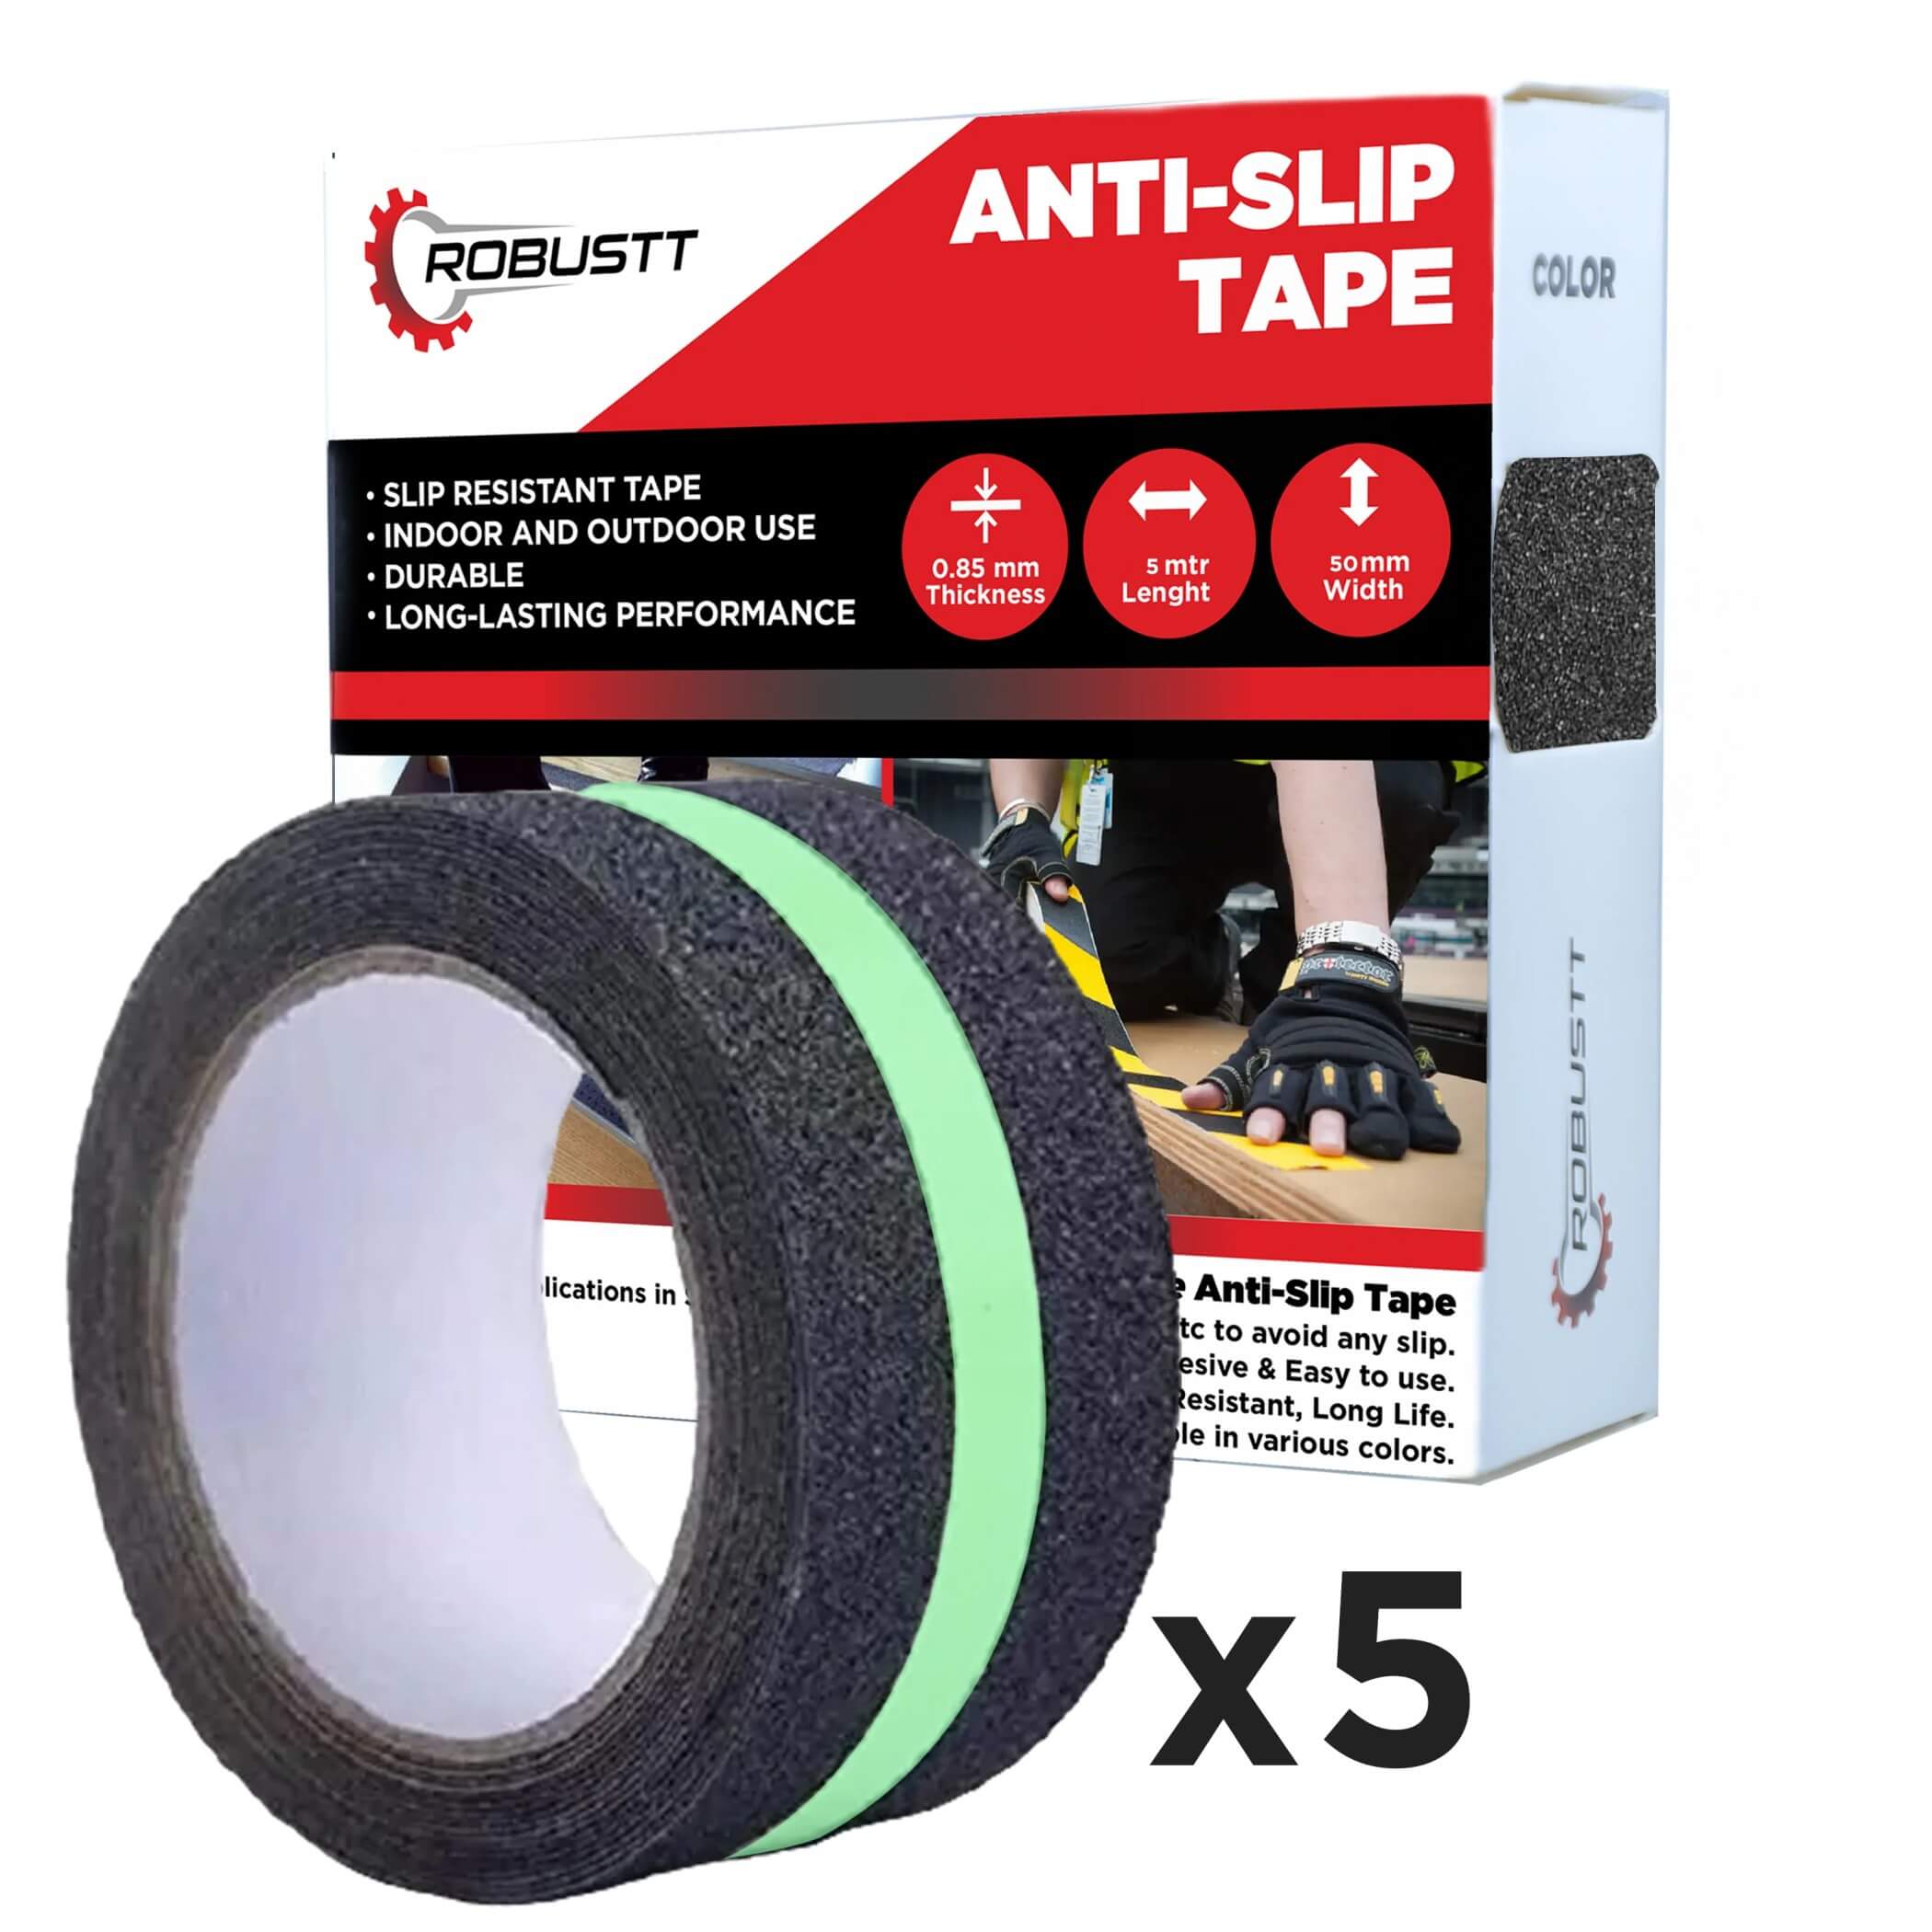 robustt-anti-skid-antislip-5mtr-guaranteed-x50mm-neon-fall-resistant-with-pet-material-and-solvent-acrylic-adhesive-tape-pack-of-5